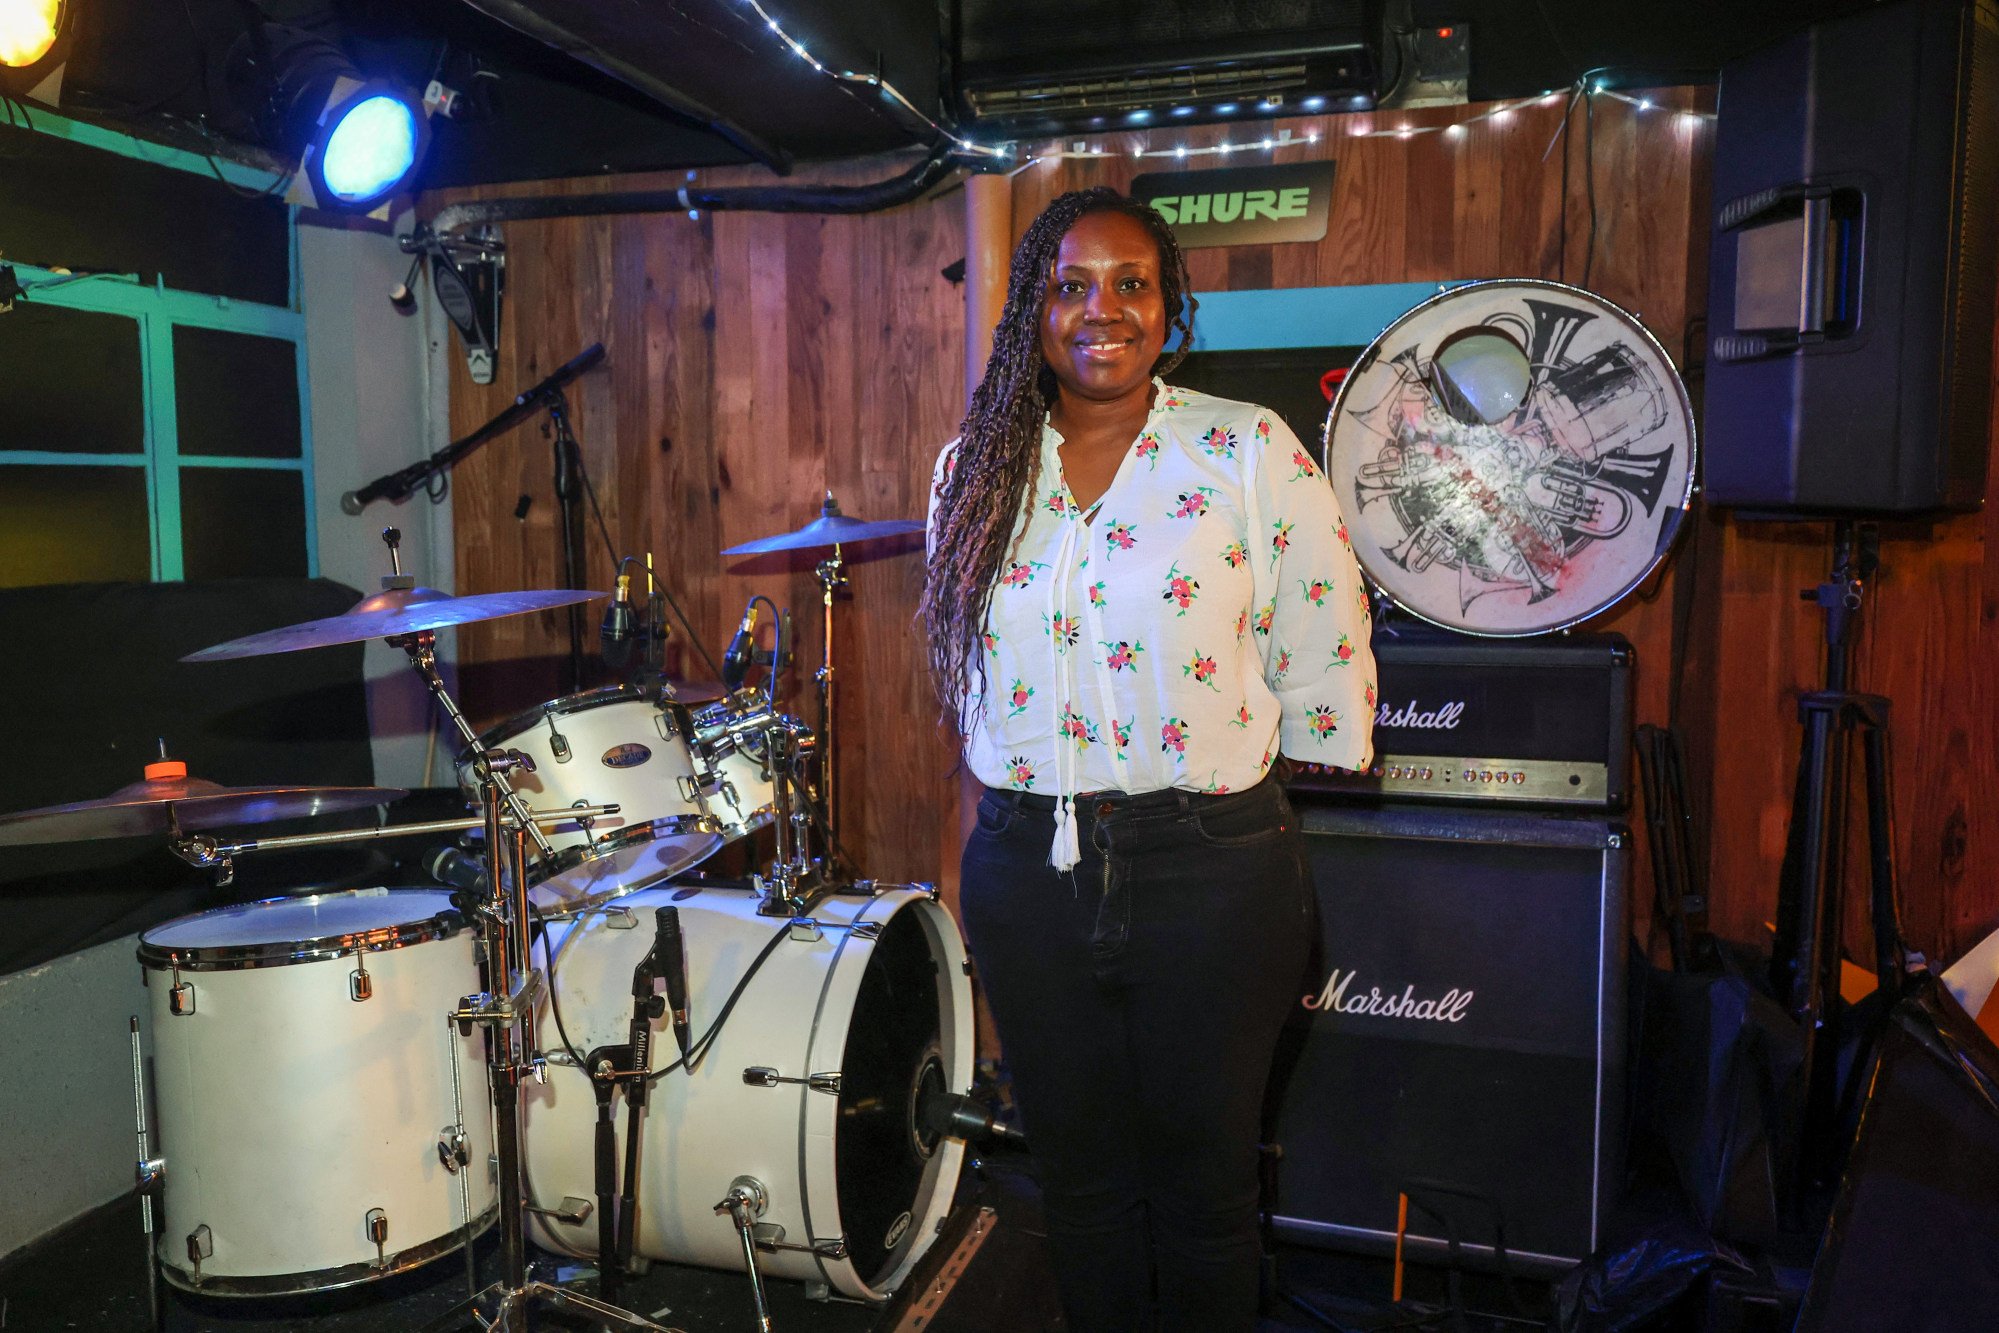 Alicia Beale, owner of the Aftermath Bar, says the venue has tried to add more events to its regular line-up of live music and comedy shows. Photo: Edmond So